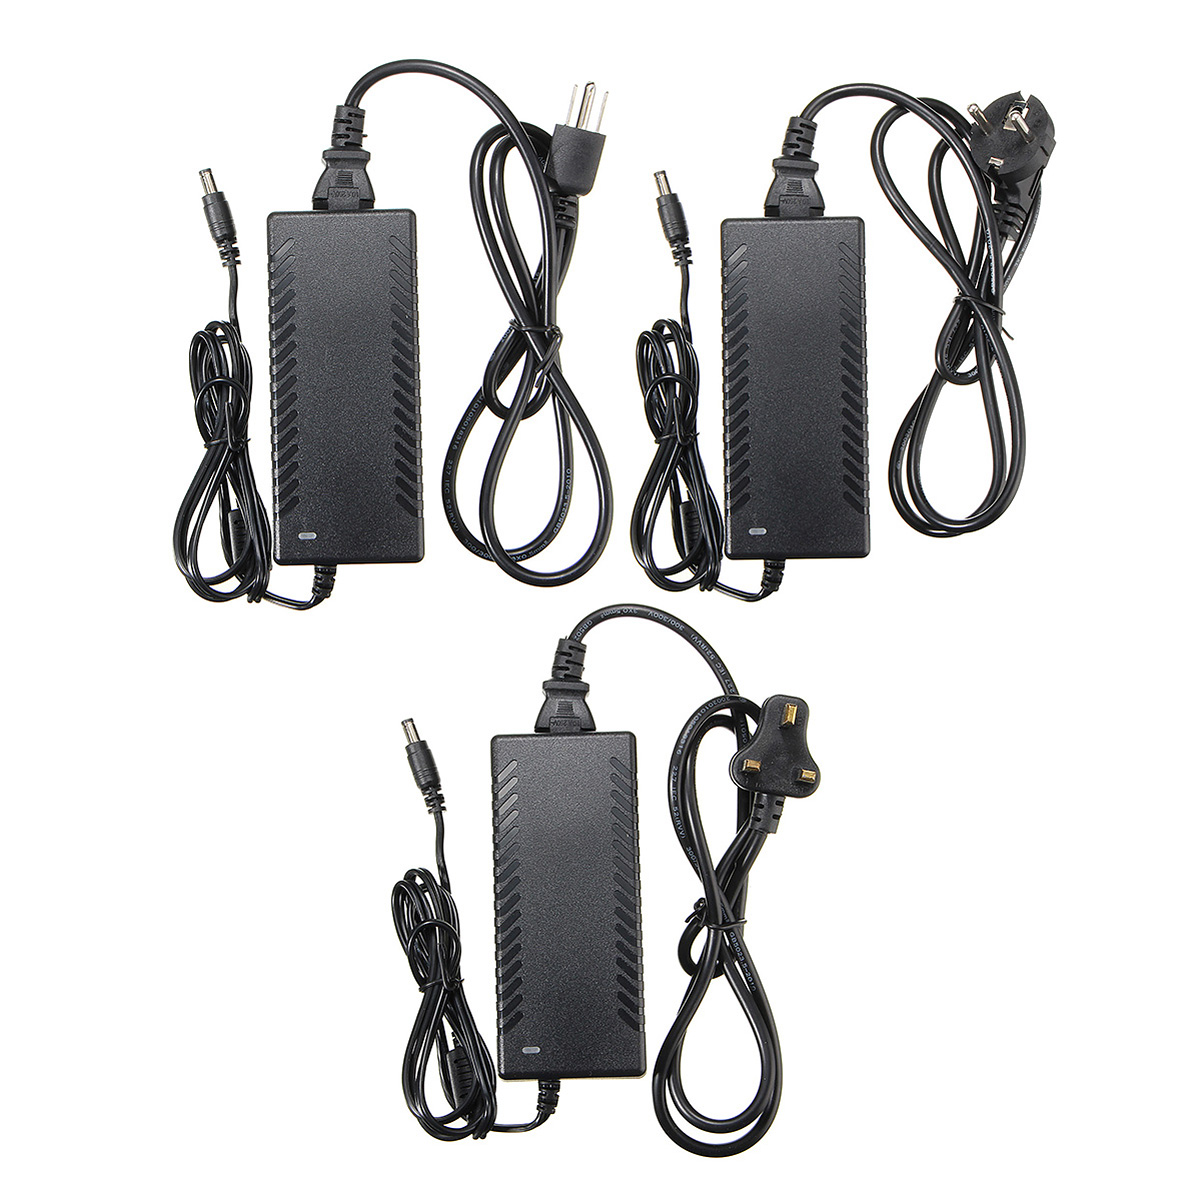 

24V 4A 96W 5.5x2.5mm Power Supply Adapter